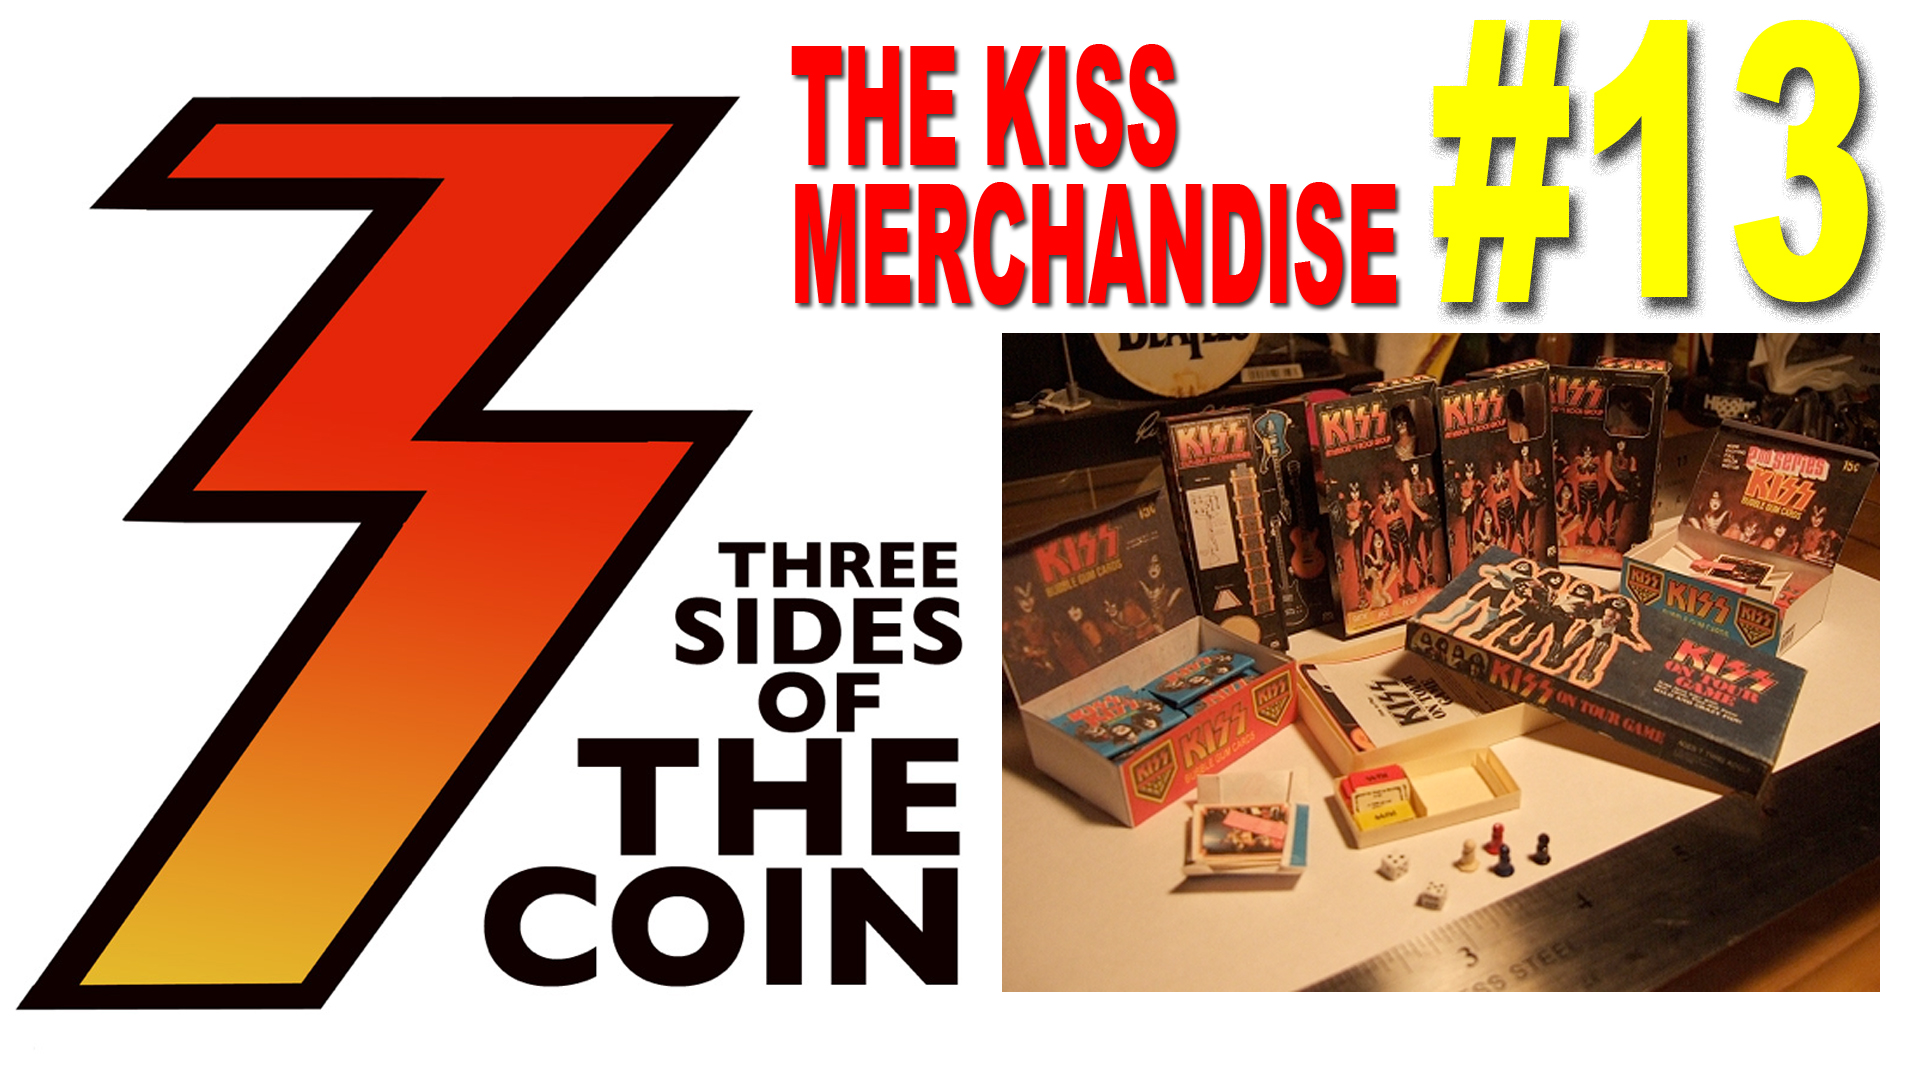 Three sides. Kiss Merchandise. Ace Frehley the other Side of the Coin Ace. 2 Sides of Coin.